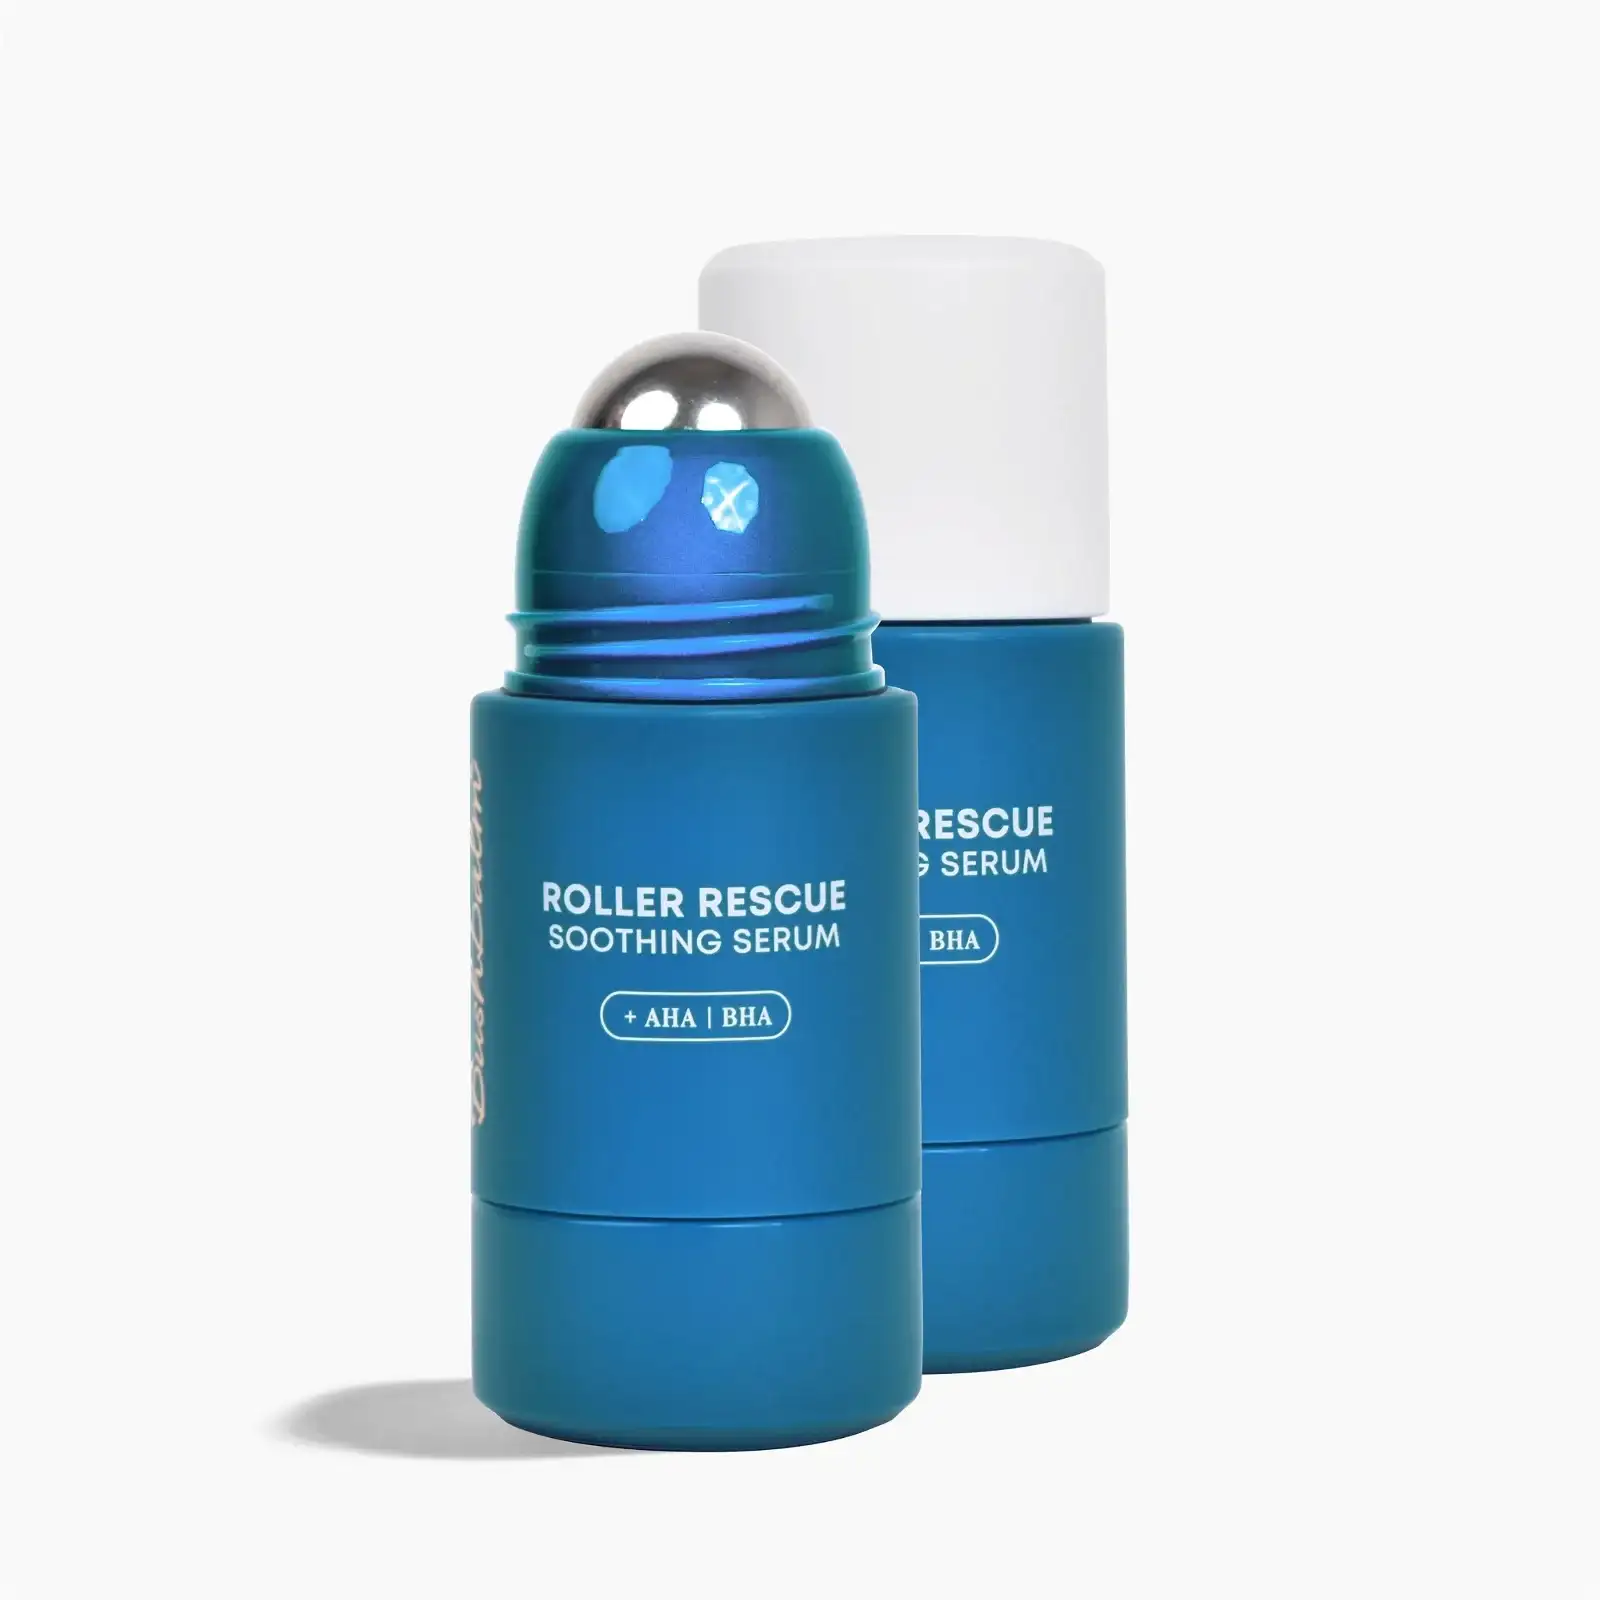 Image of Roller Rescue Soothing Serum